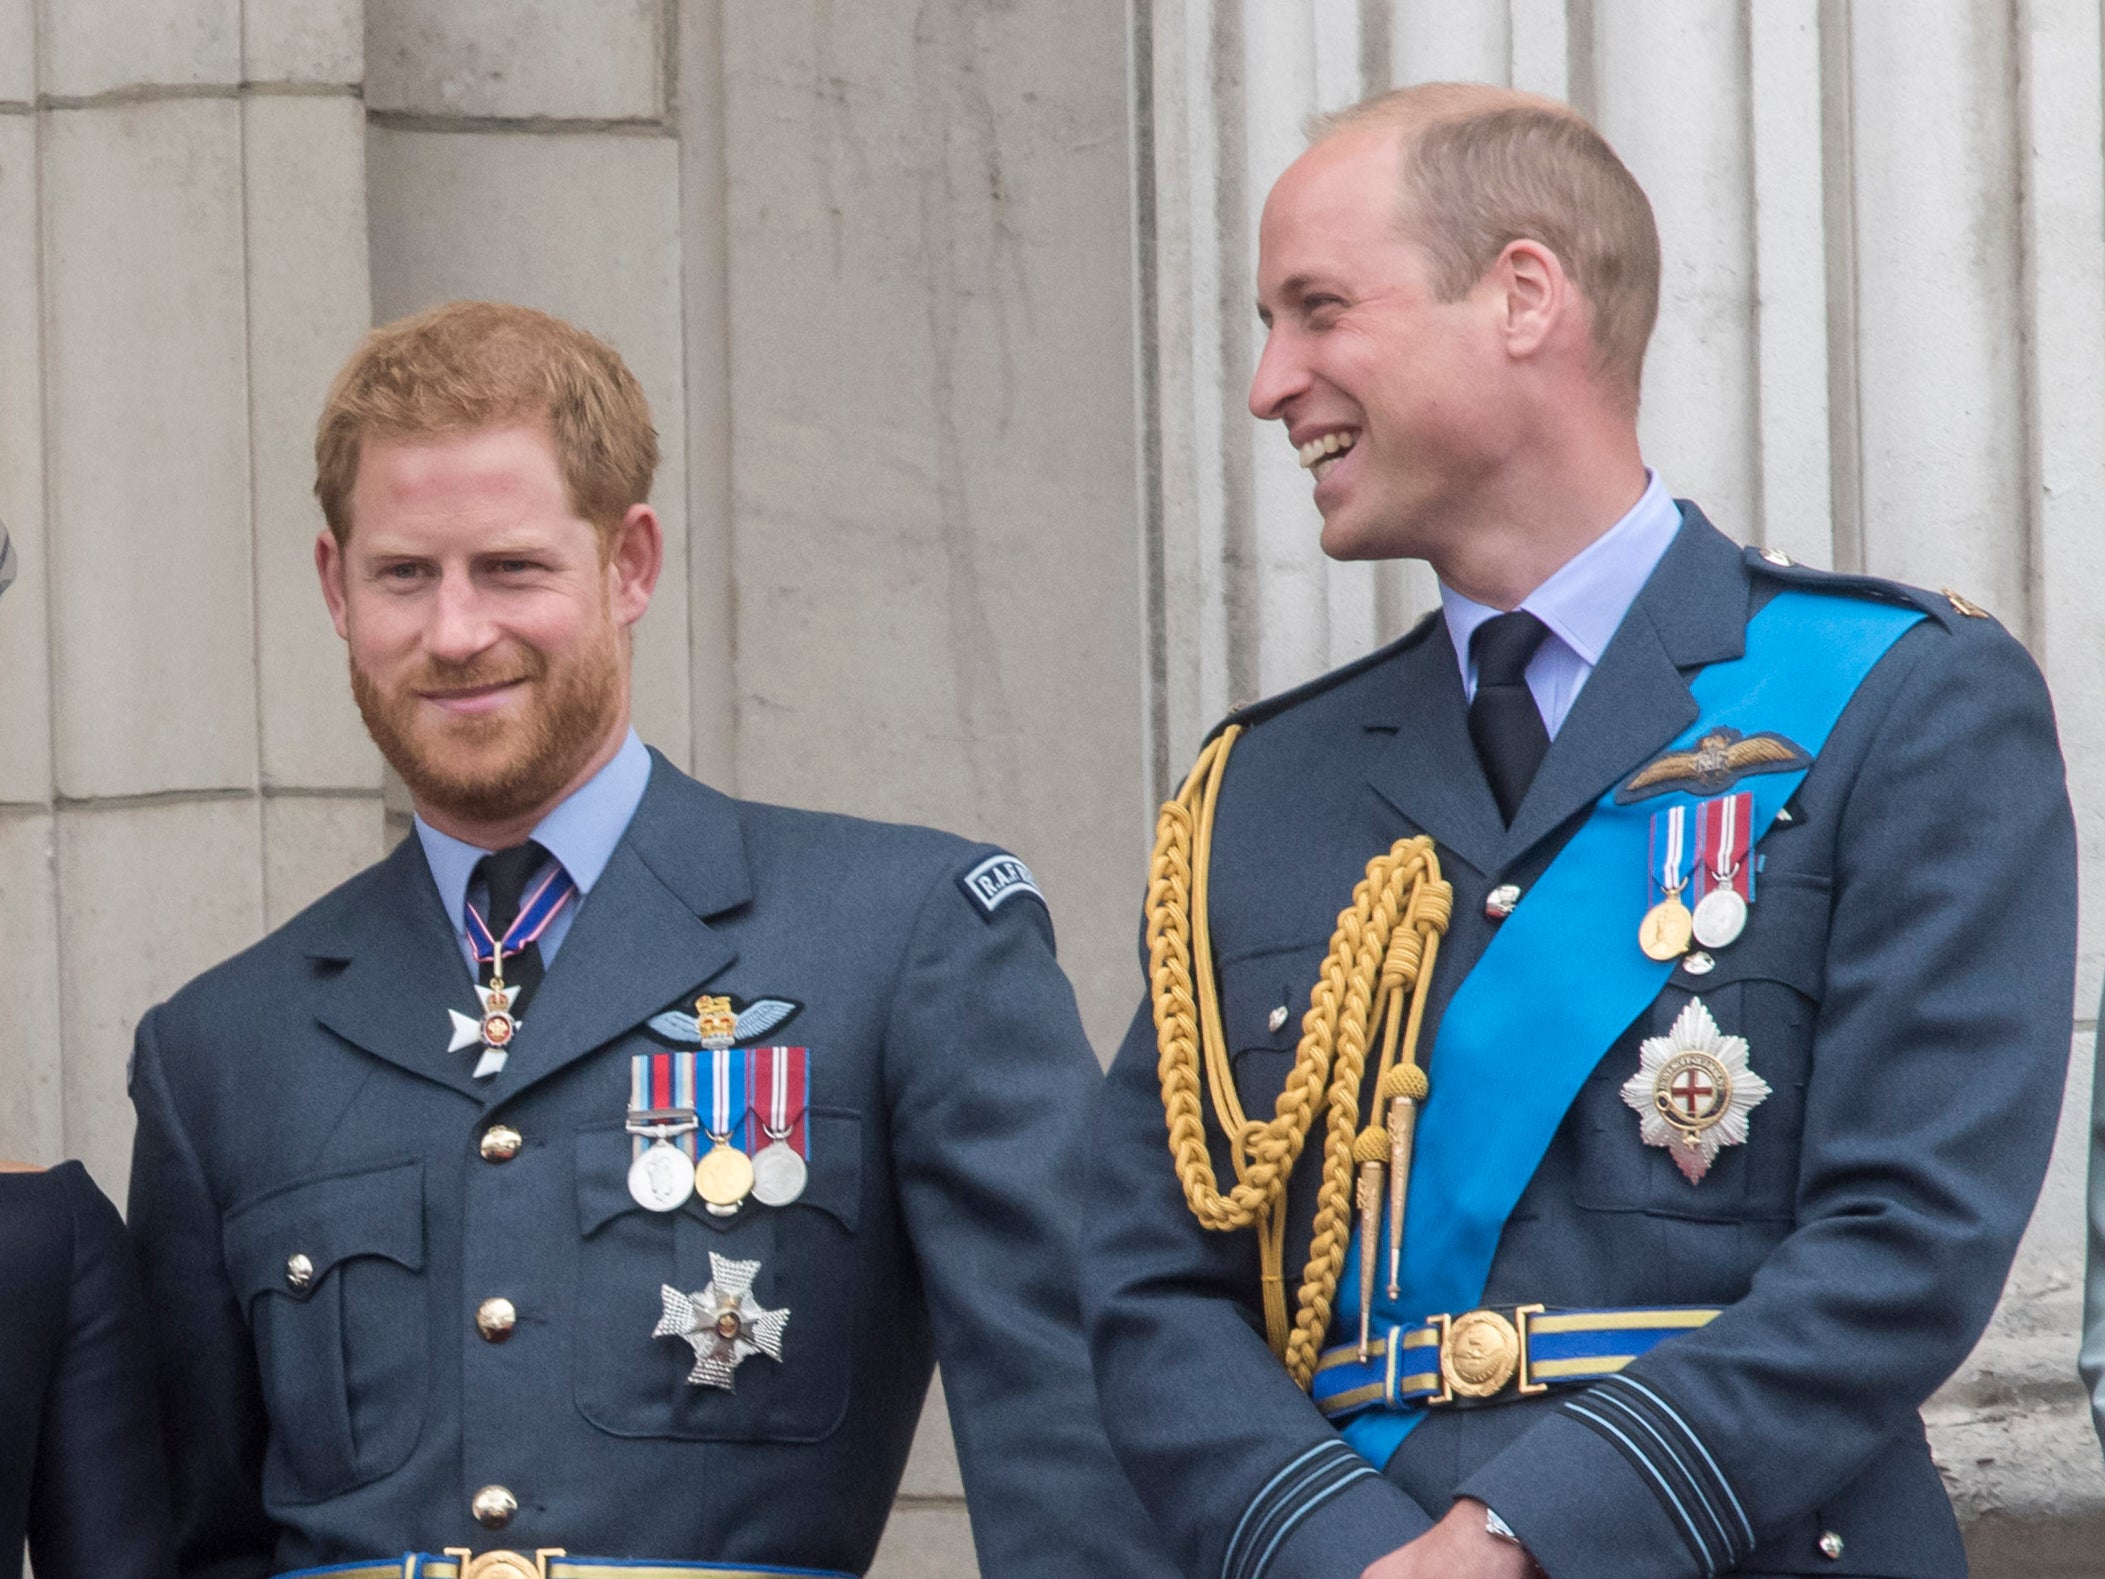 Harry and William’s relationship has been strained in recent years